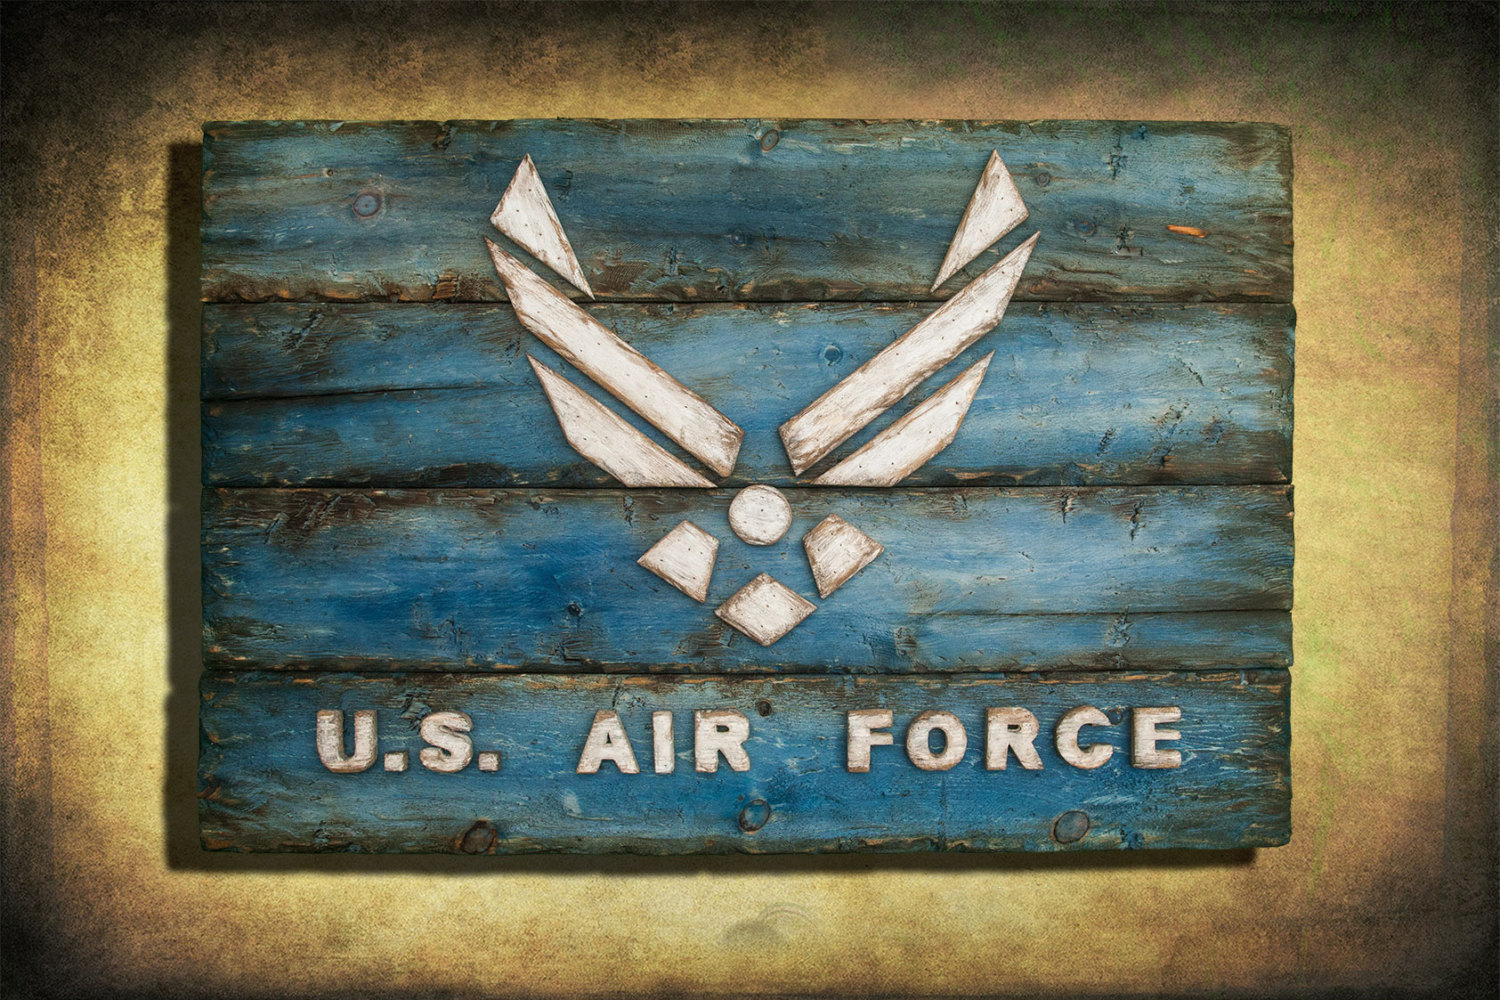 U. S. Air Force! Weathered Wood One of a kind, Wooden, vintage, art, distressed, weathered, recycled, California flag art. blue